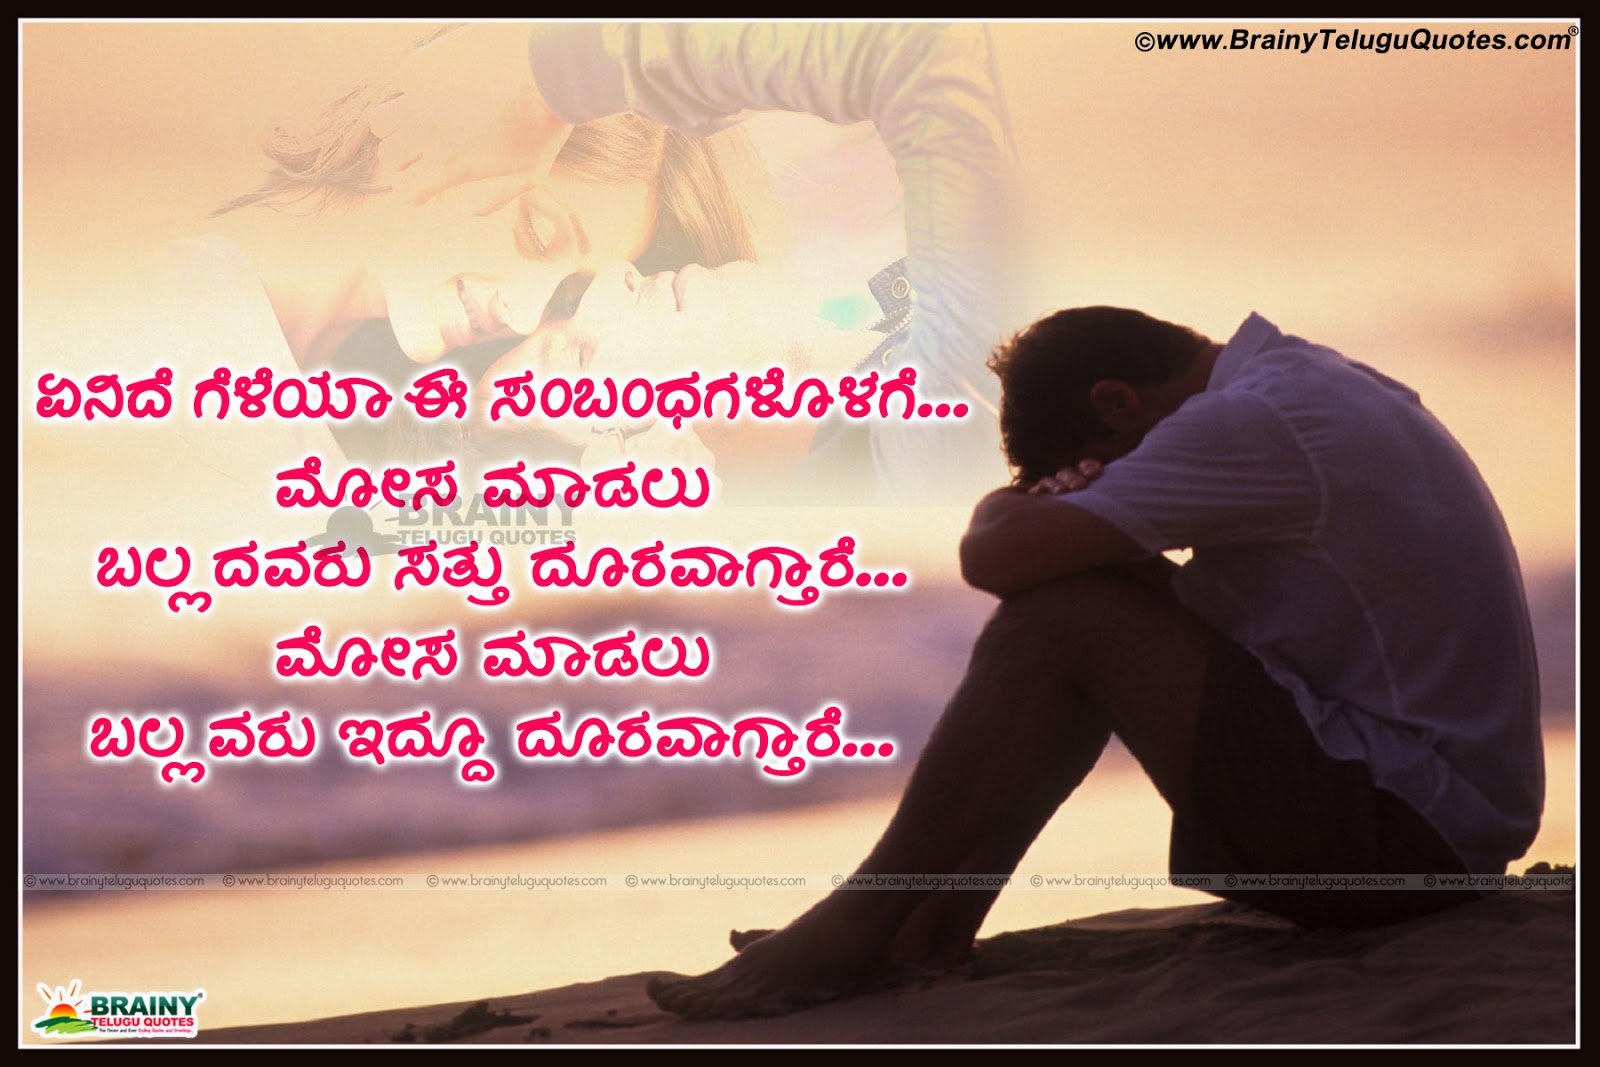 Kannada Quotes Sad Kannada love failure quotes and miss you images